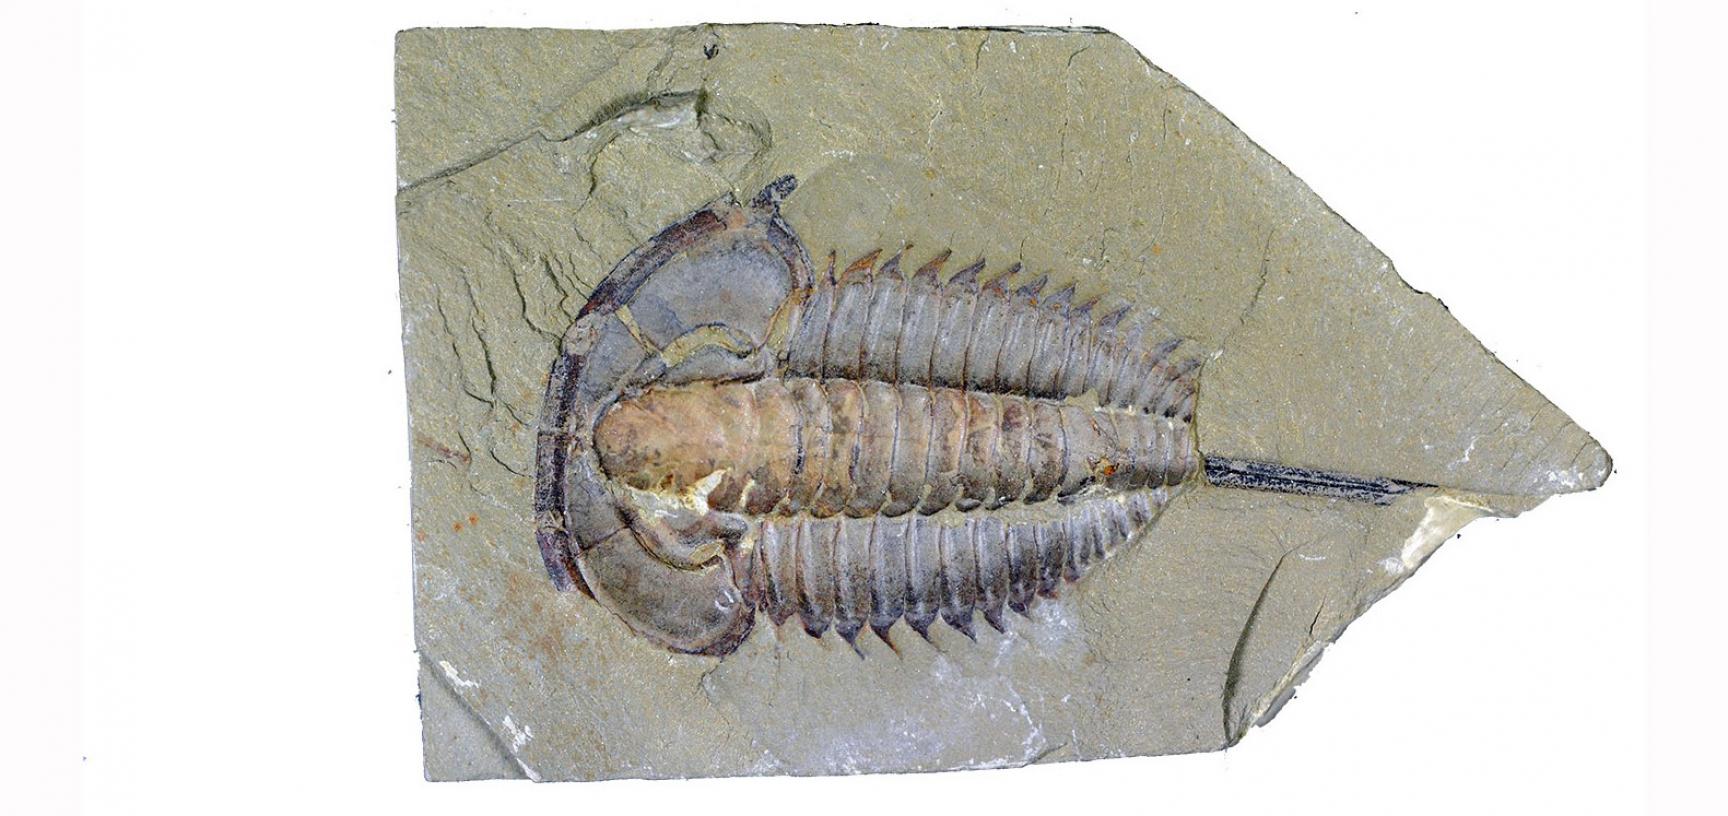 An exceptionally preserved trilobite from the Chenjiang biota, China